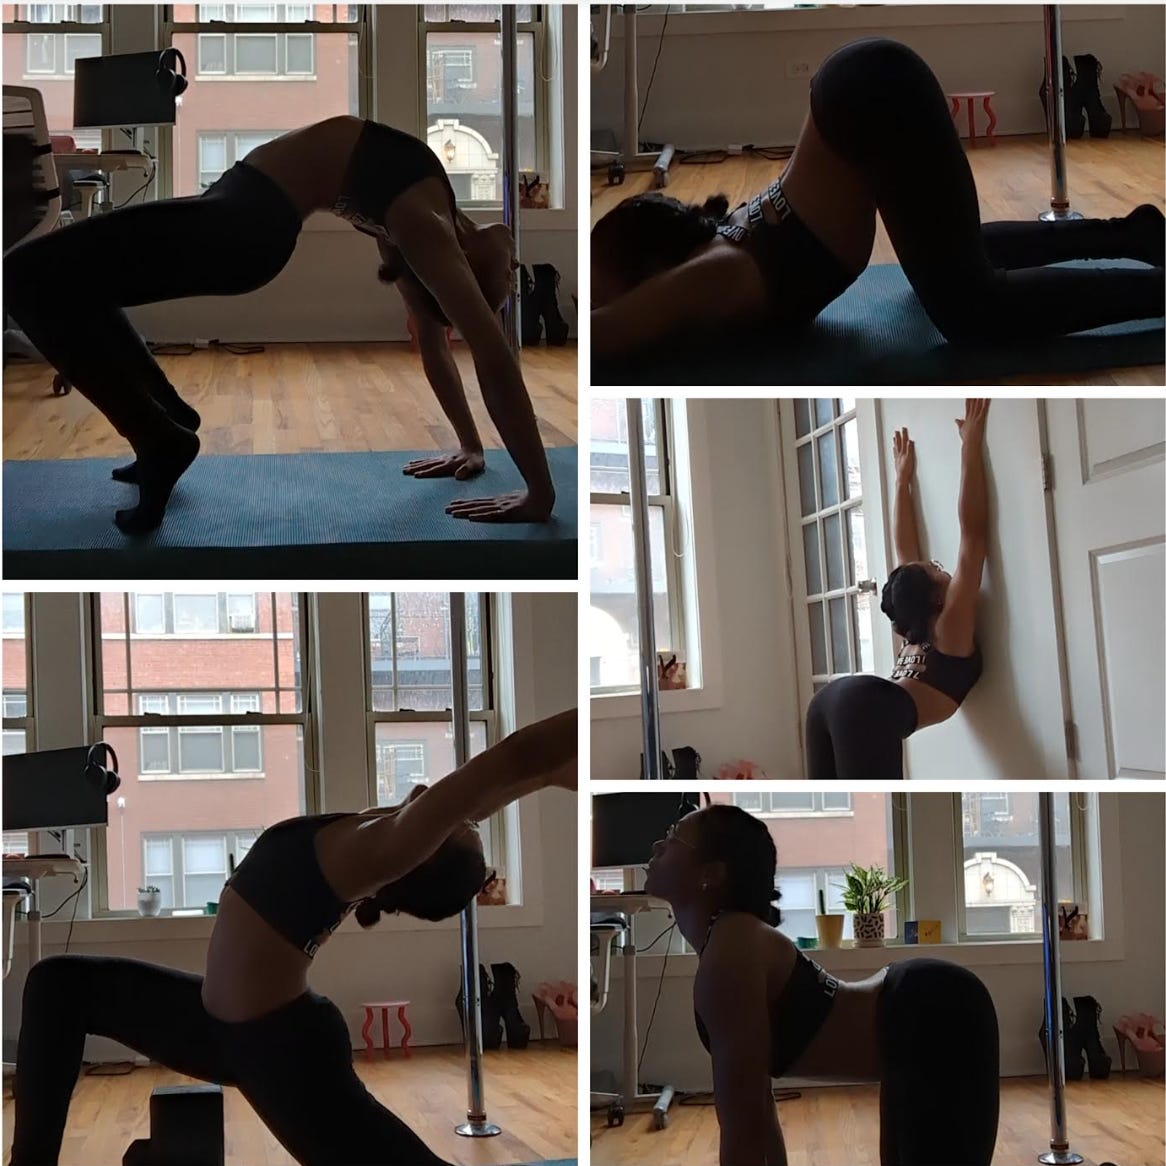 A handful pf photos of Nathalie attempting other flexibility poses in her living room, including puppydog pose, moose pose, and cow pose to show a deep curvature of her back